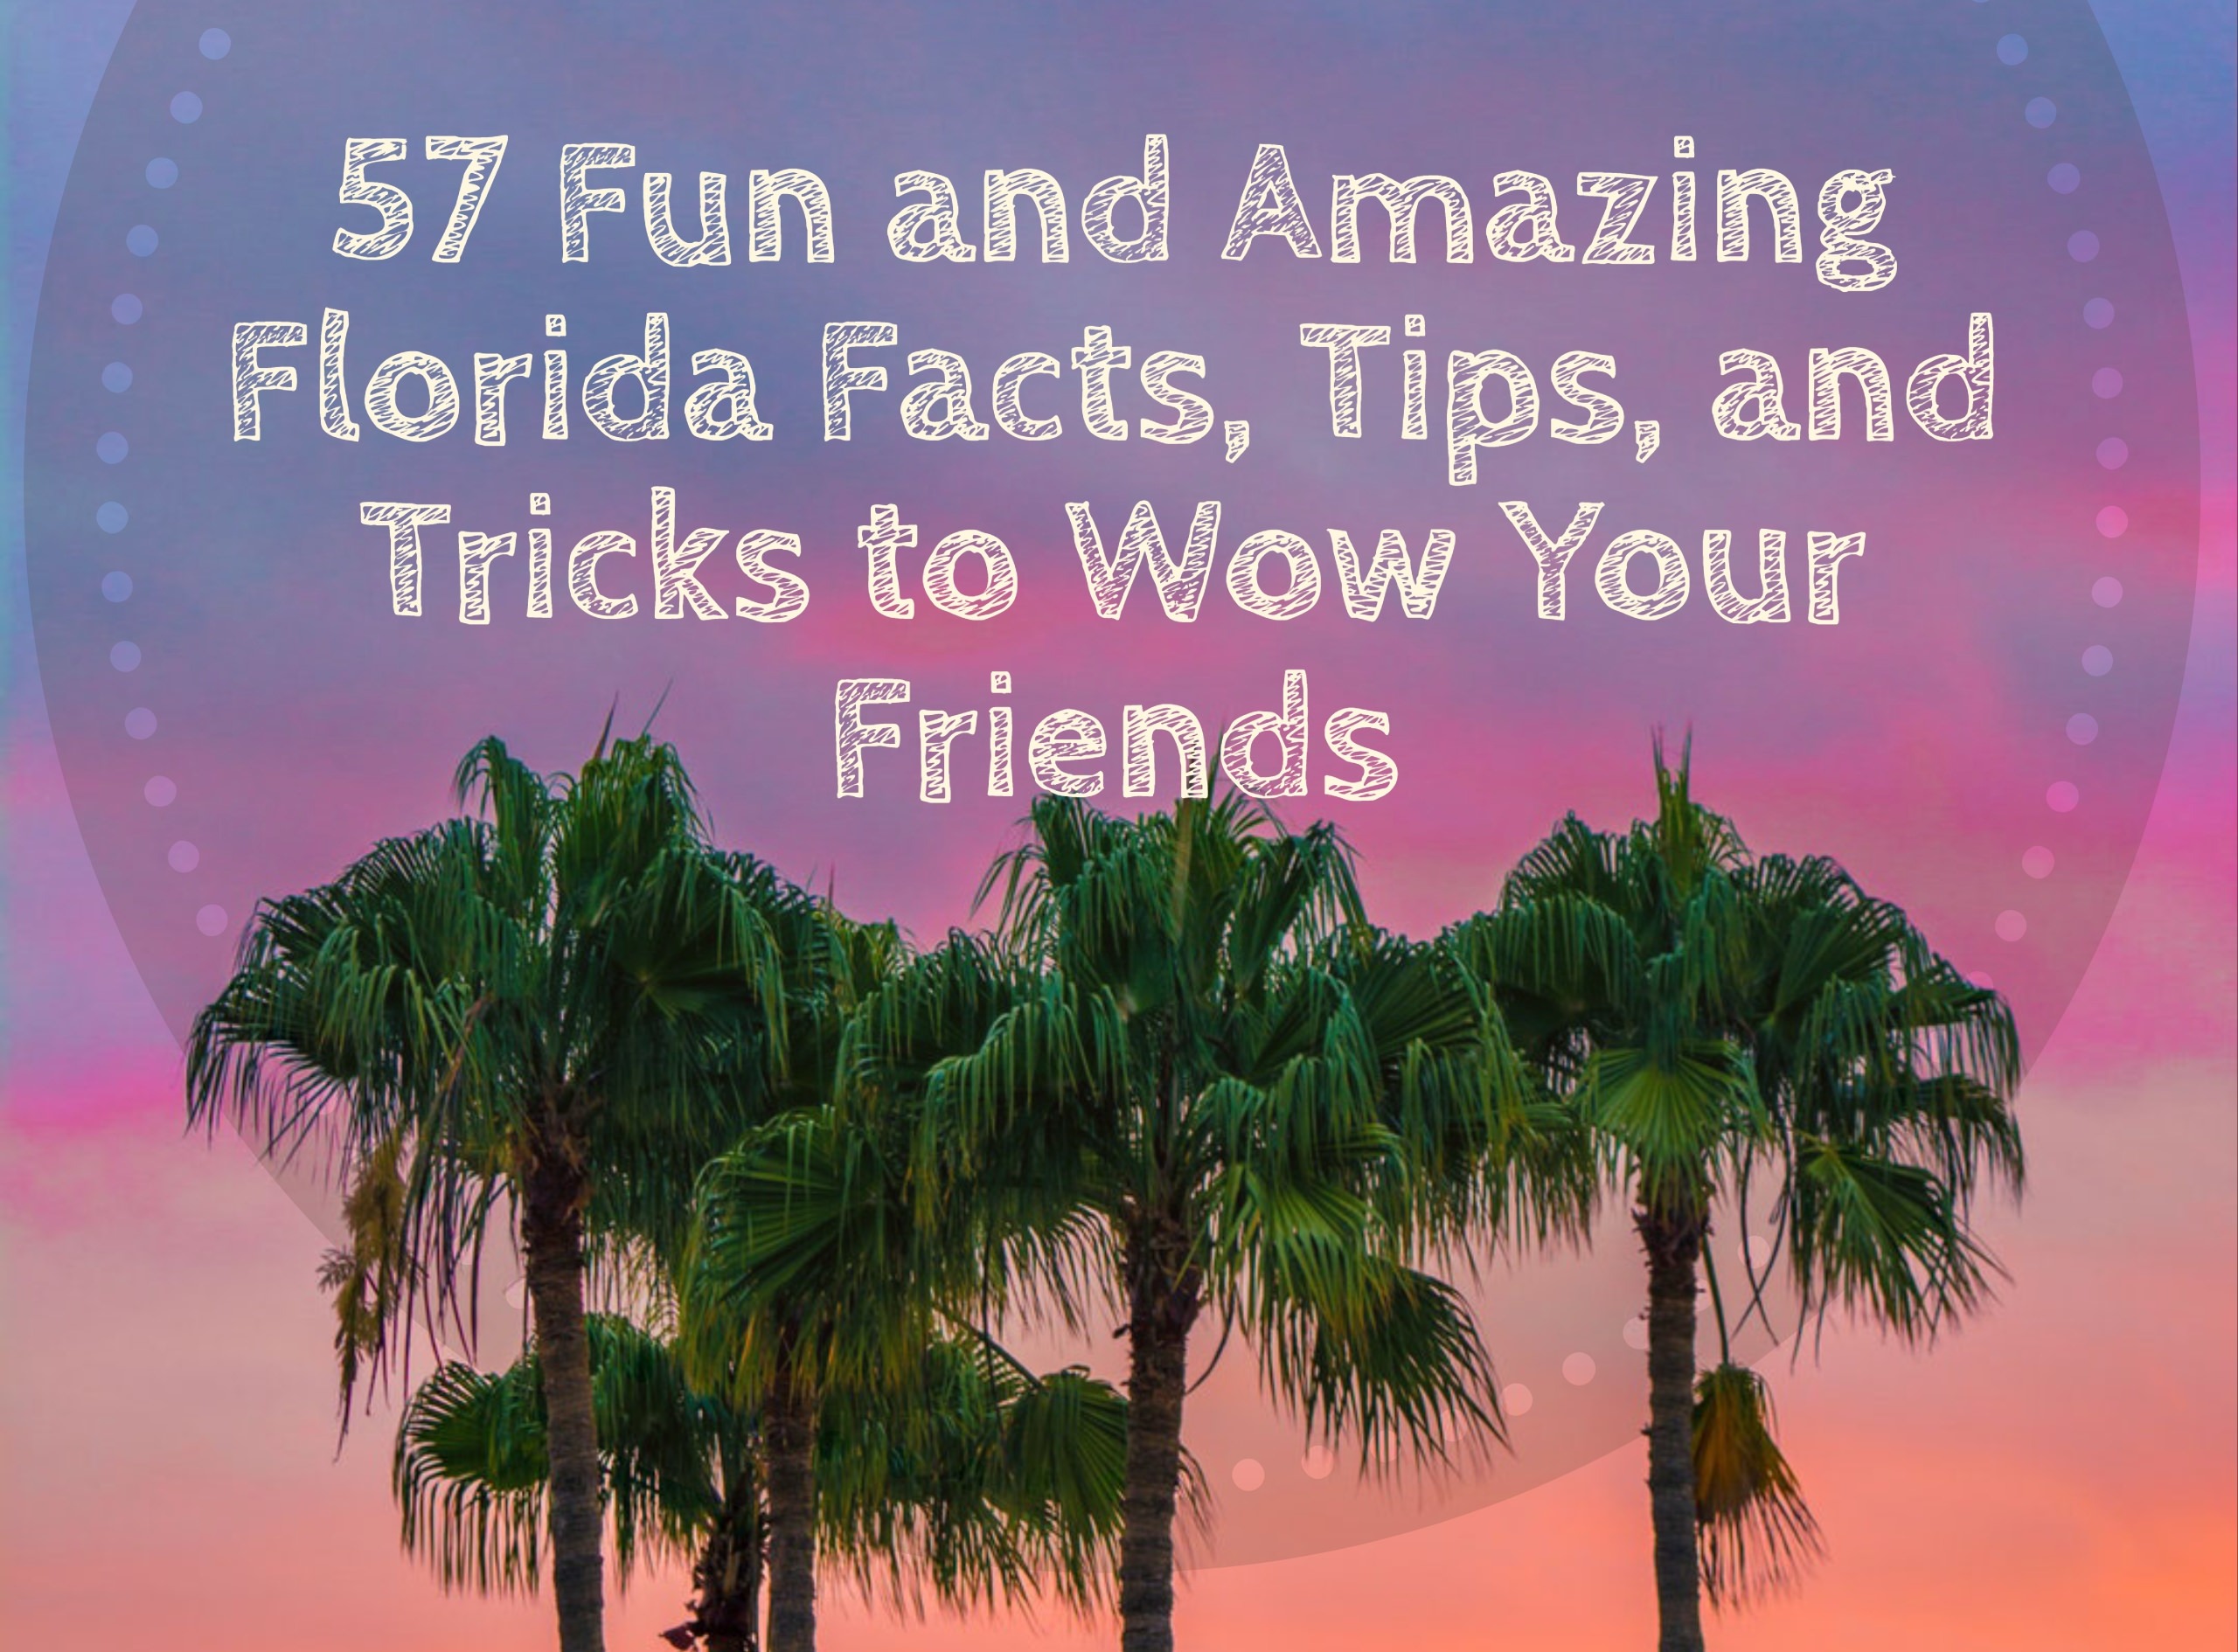 57 Amazing Florida Facts Tips and TricksC